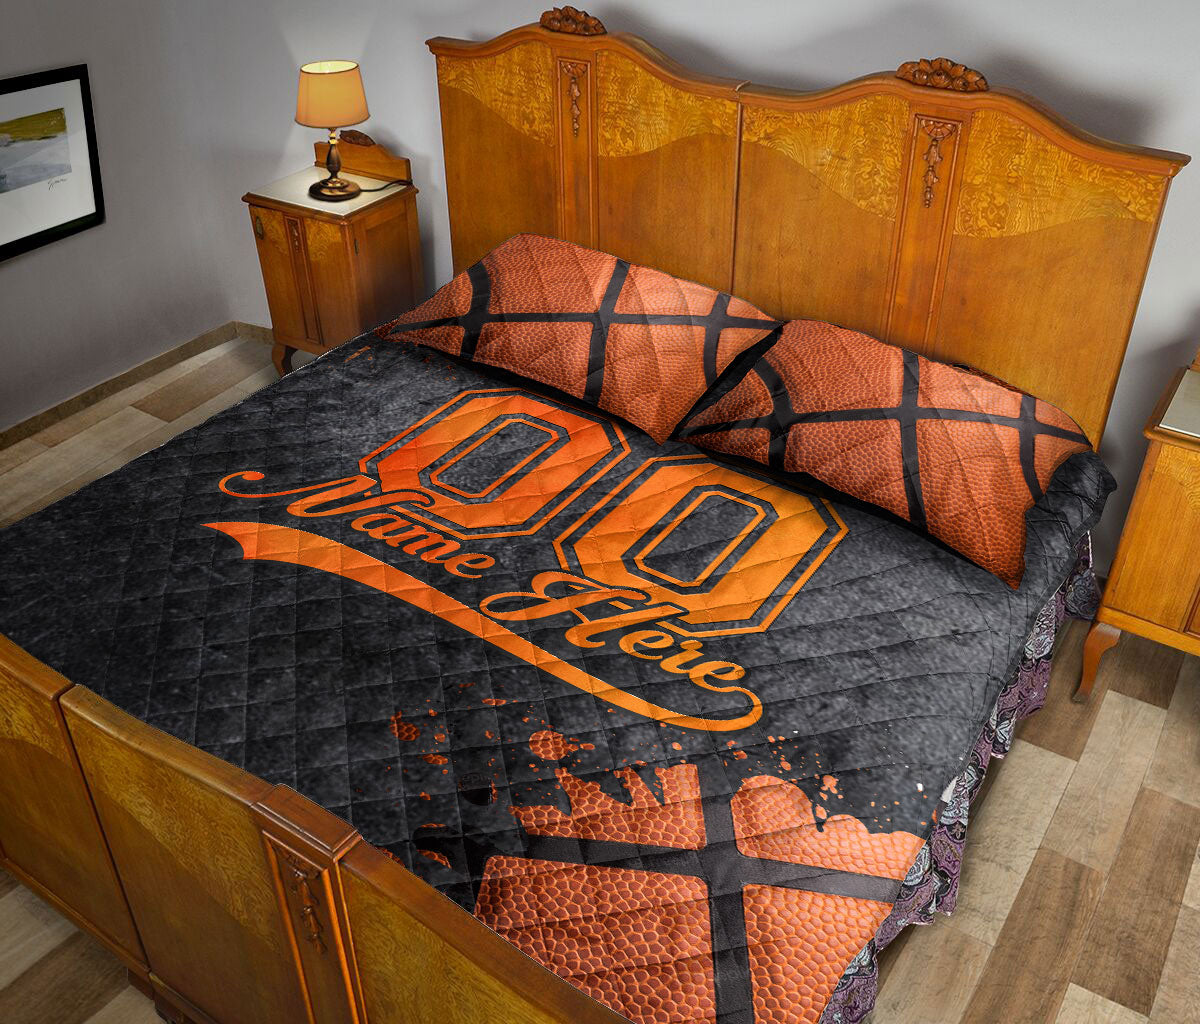 Ohaprints-Quilt-Bed-Set-Pillowcase-Basketball-Orange-Ball-Watercolor-Pattern-Custom-Personalized-Name-Number-Blanket-Bedspread-Bedding-1092-Queen (80'' x 90'')